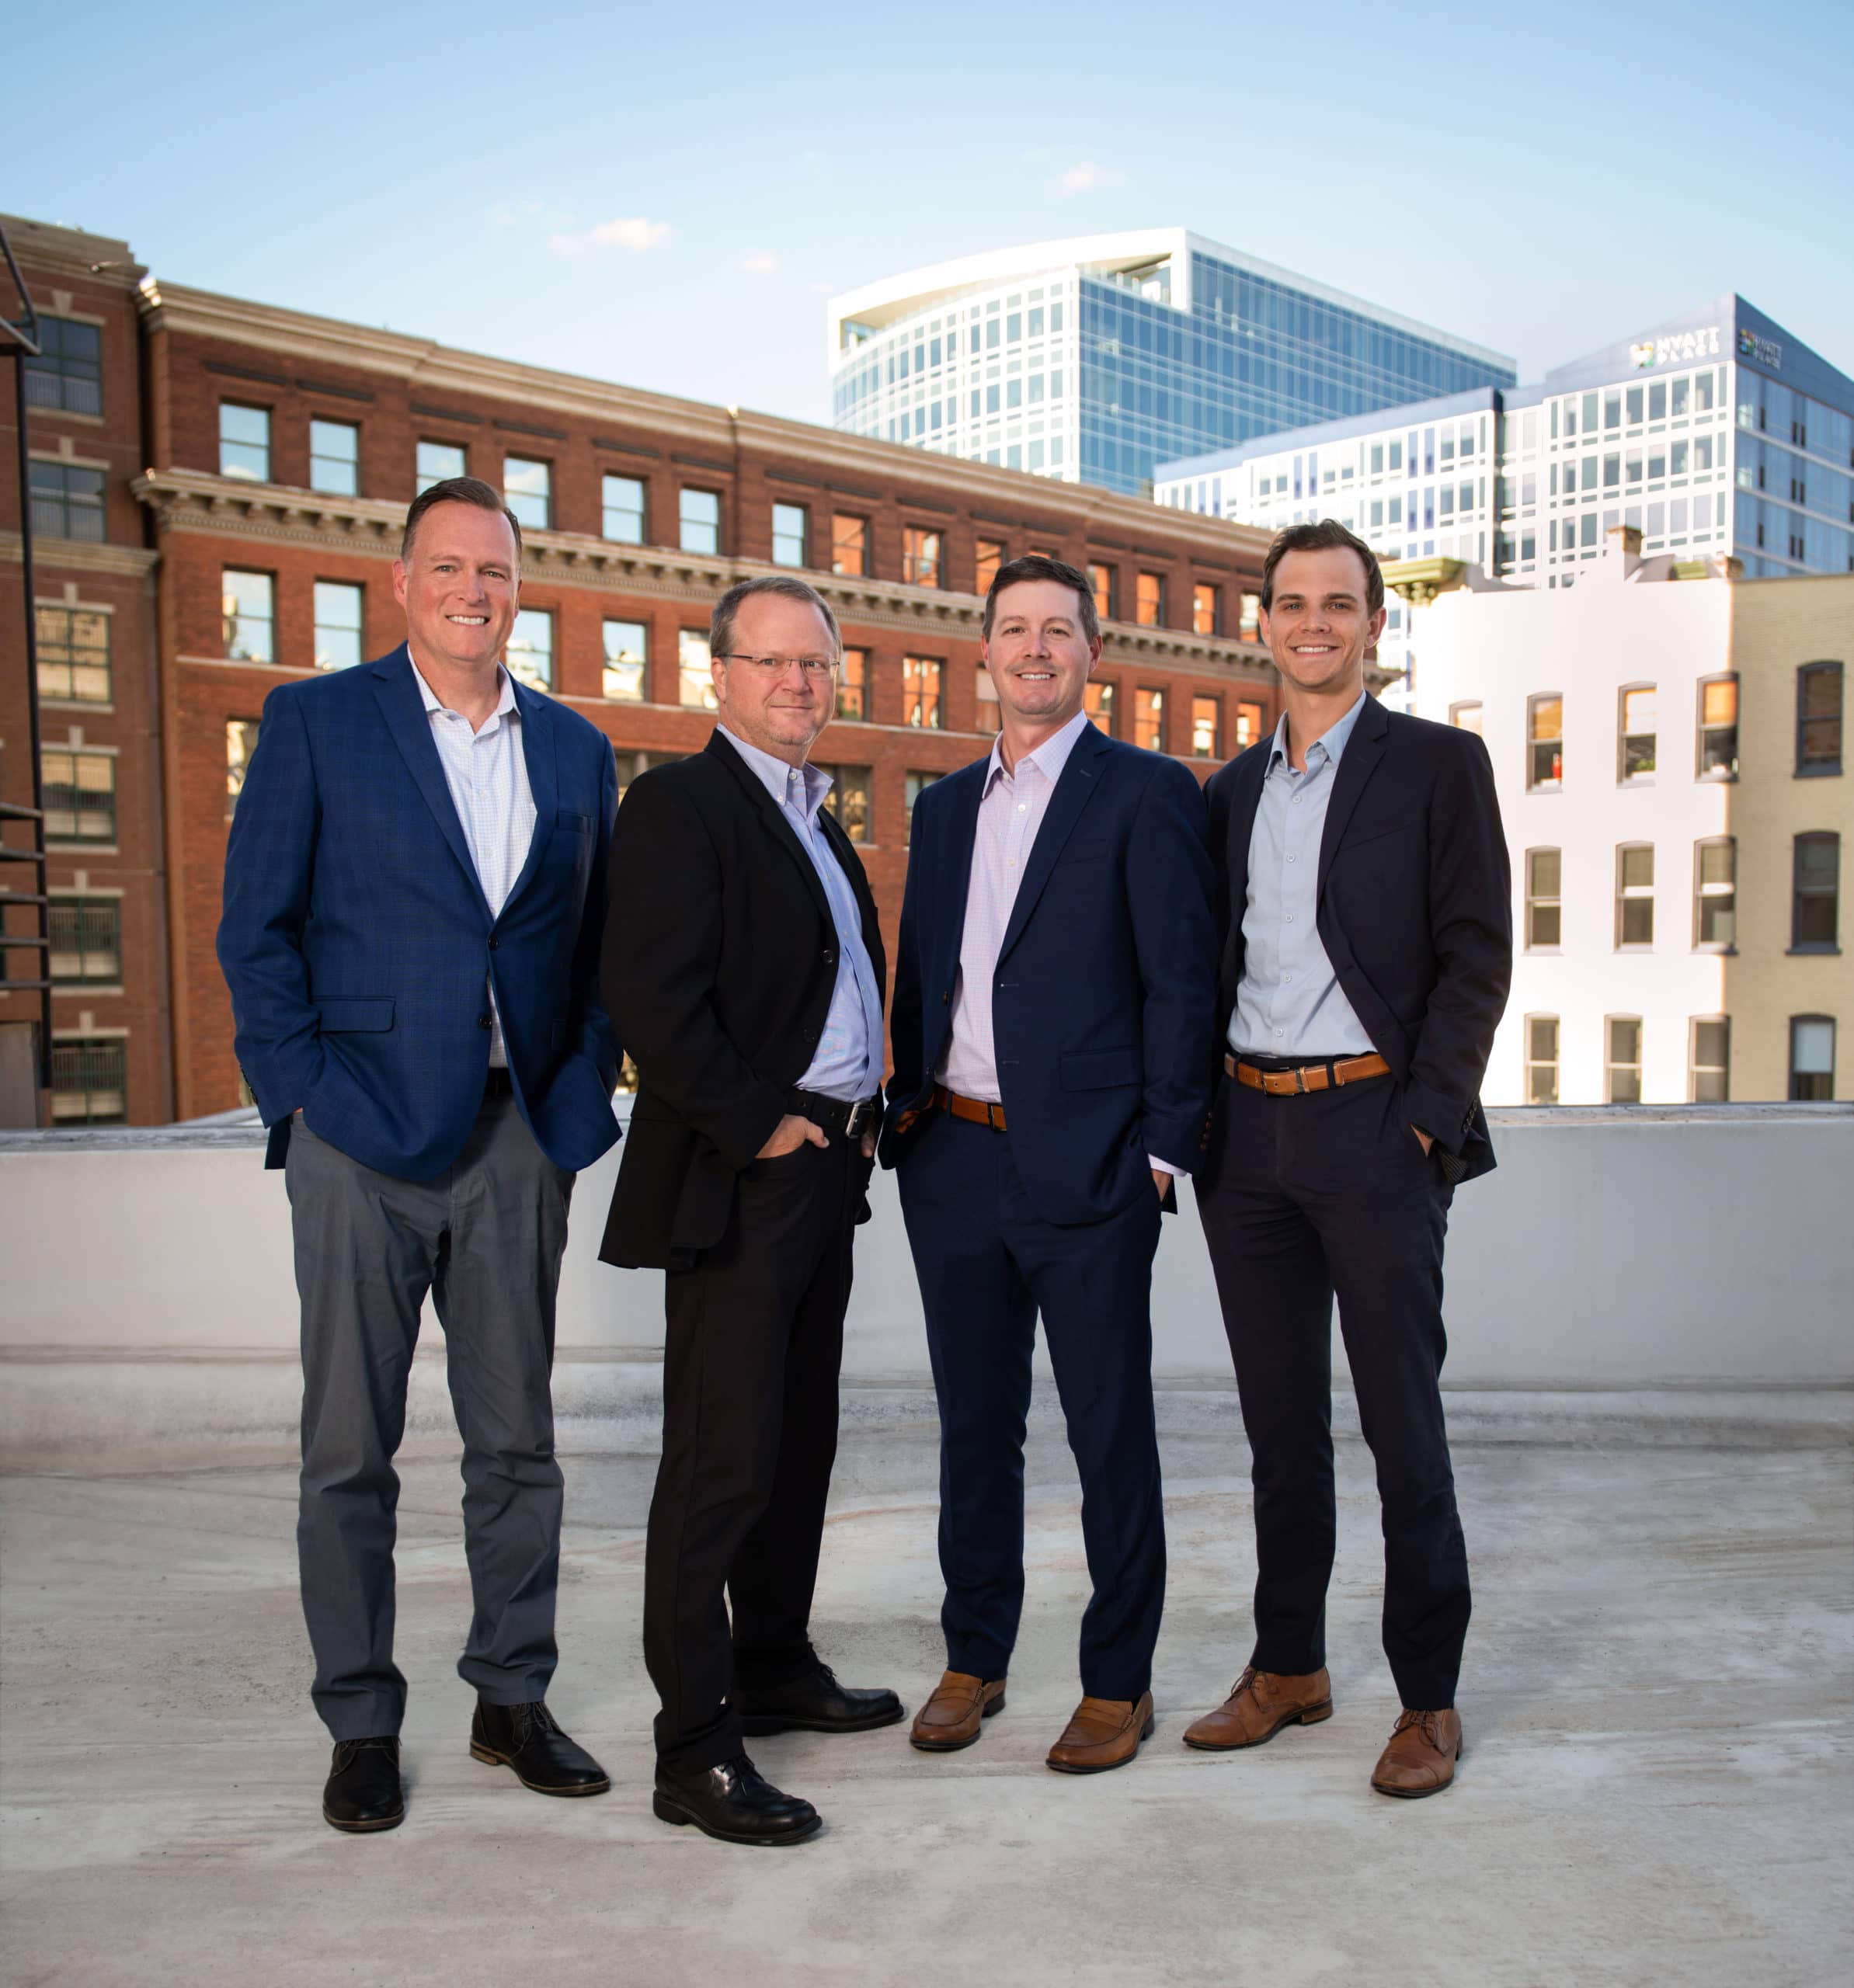 Private Capital Investing team: John Kerschen, Hector Bultynck, Mike Palm, and AJ Ebels